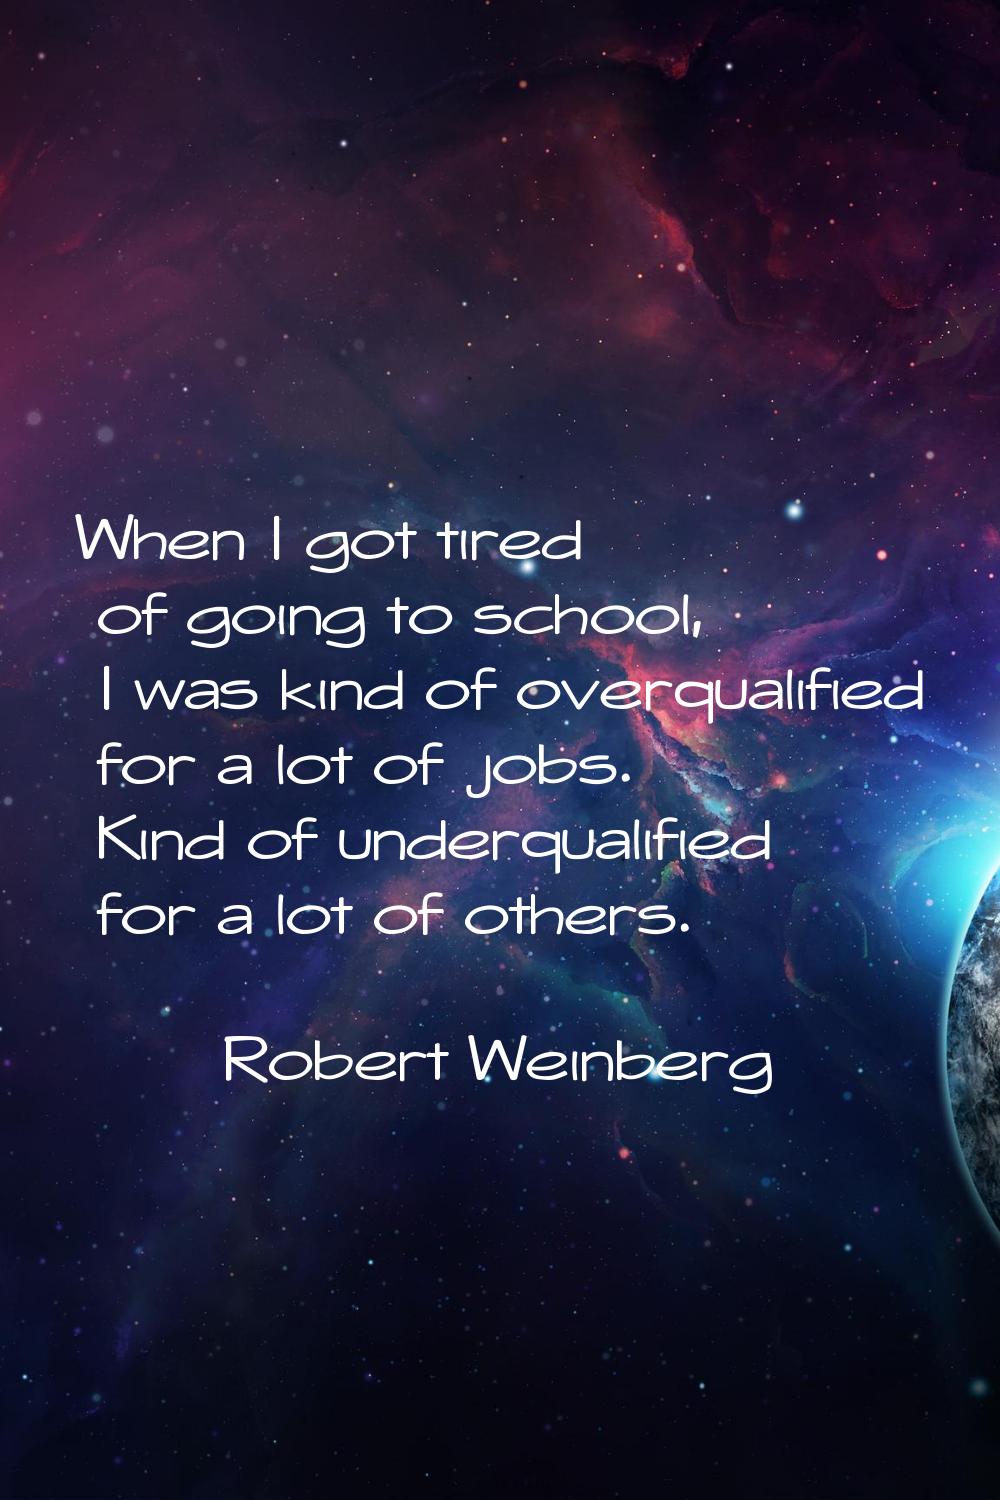 When I got tired of going to school, I was kind of overqualified for a lot of jobs. Kind of underqu